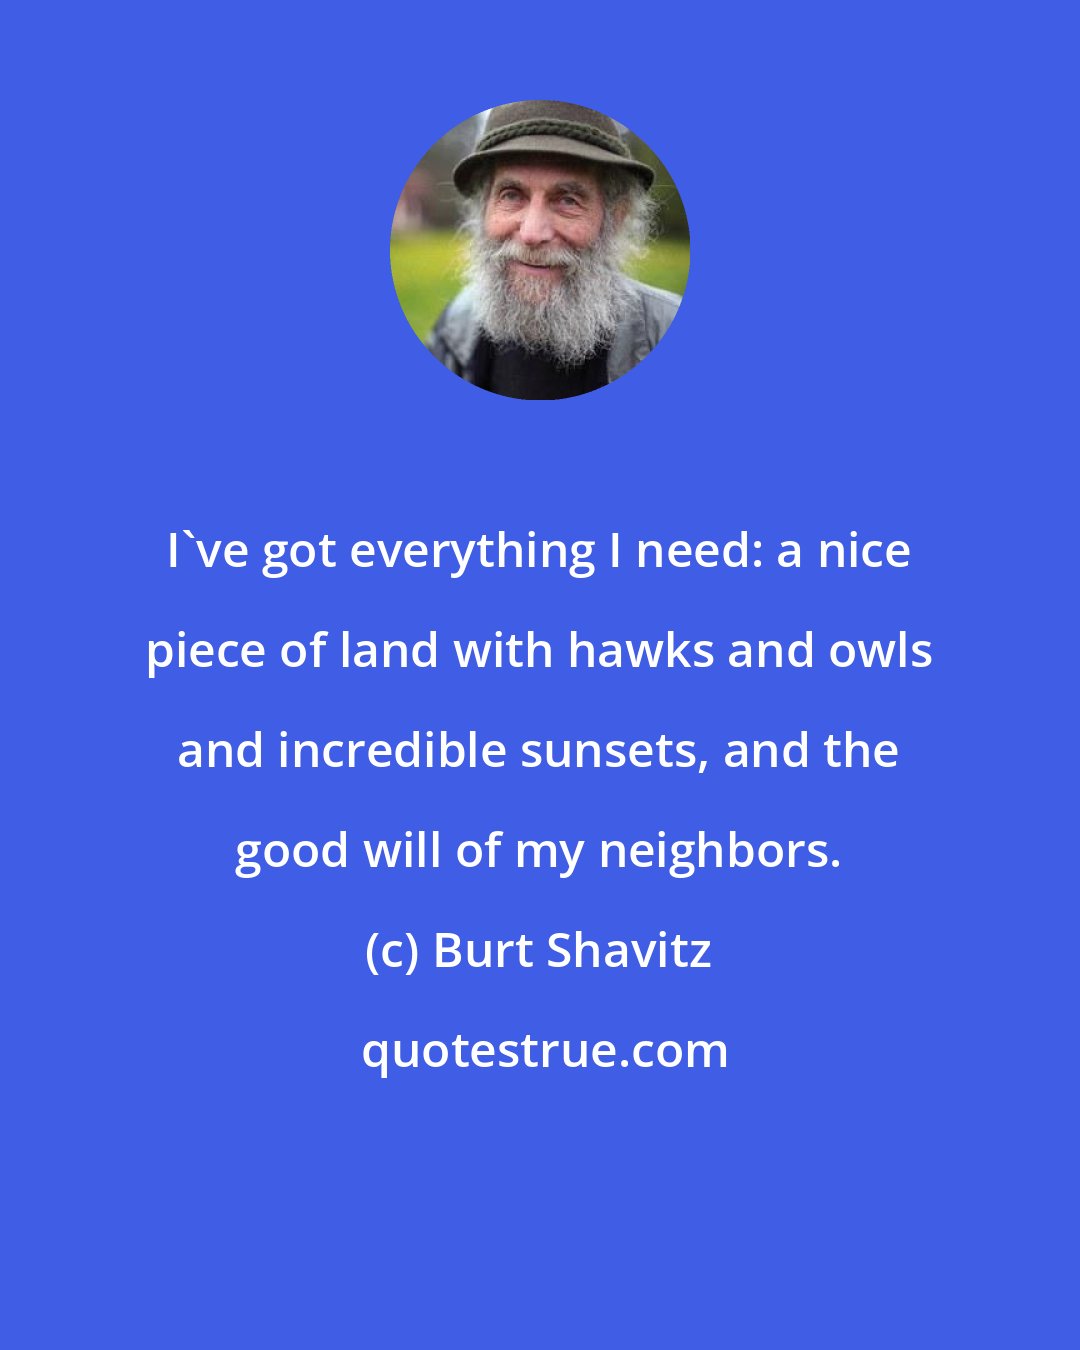 Burt Shavitz: I've got everything I need: a nice piece of land with hawks and owls and incredible sunsets, and the good will of my neighbors.